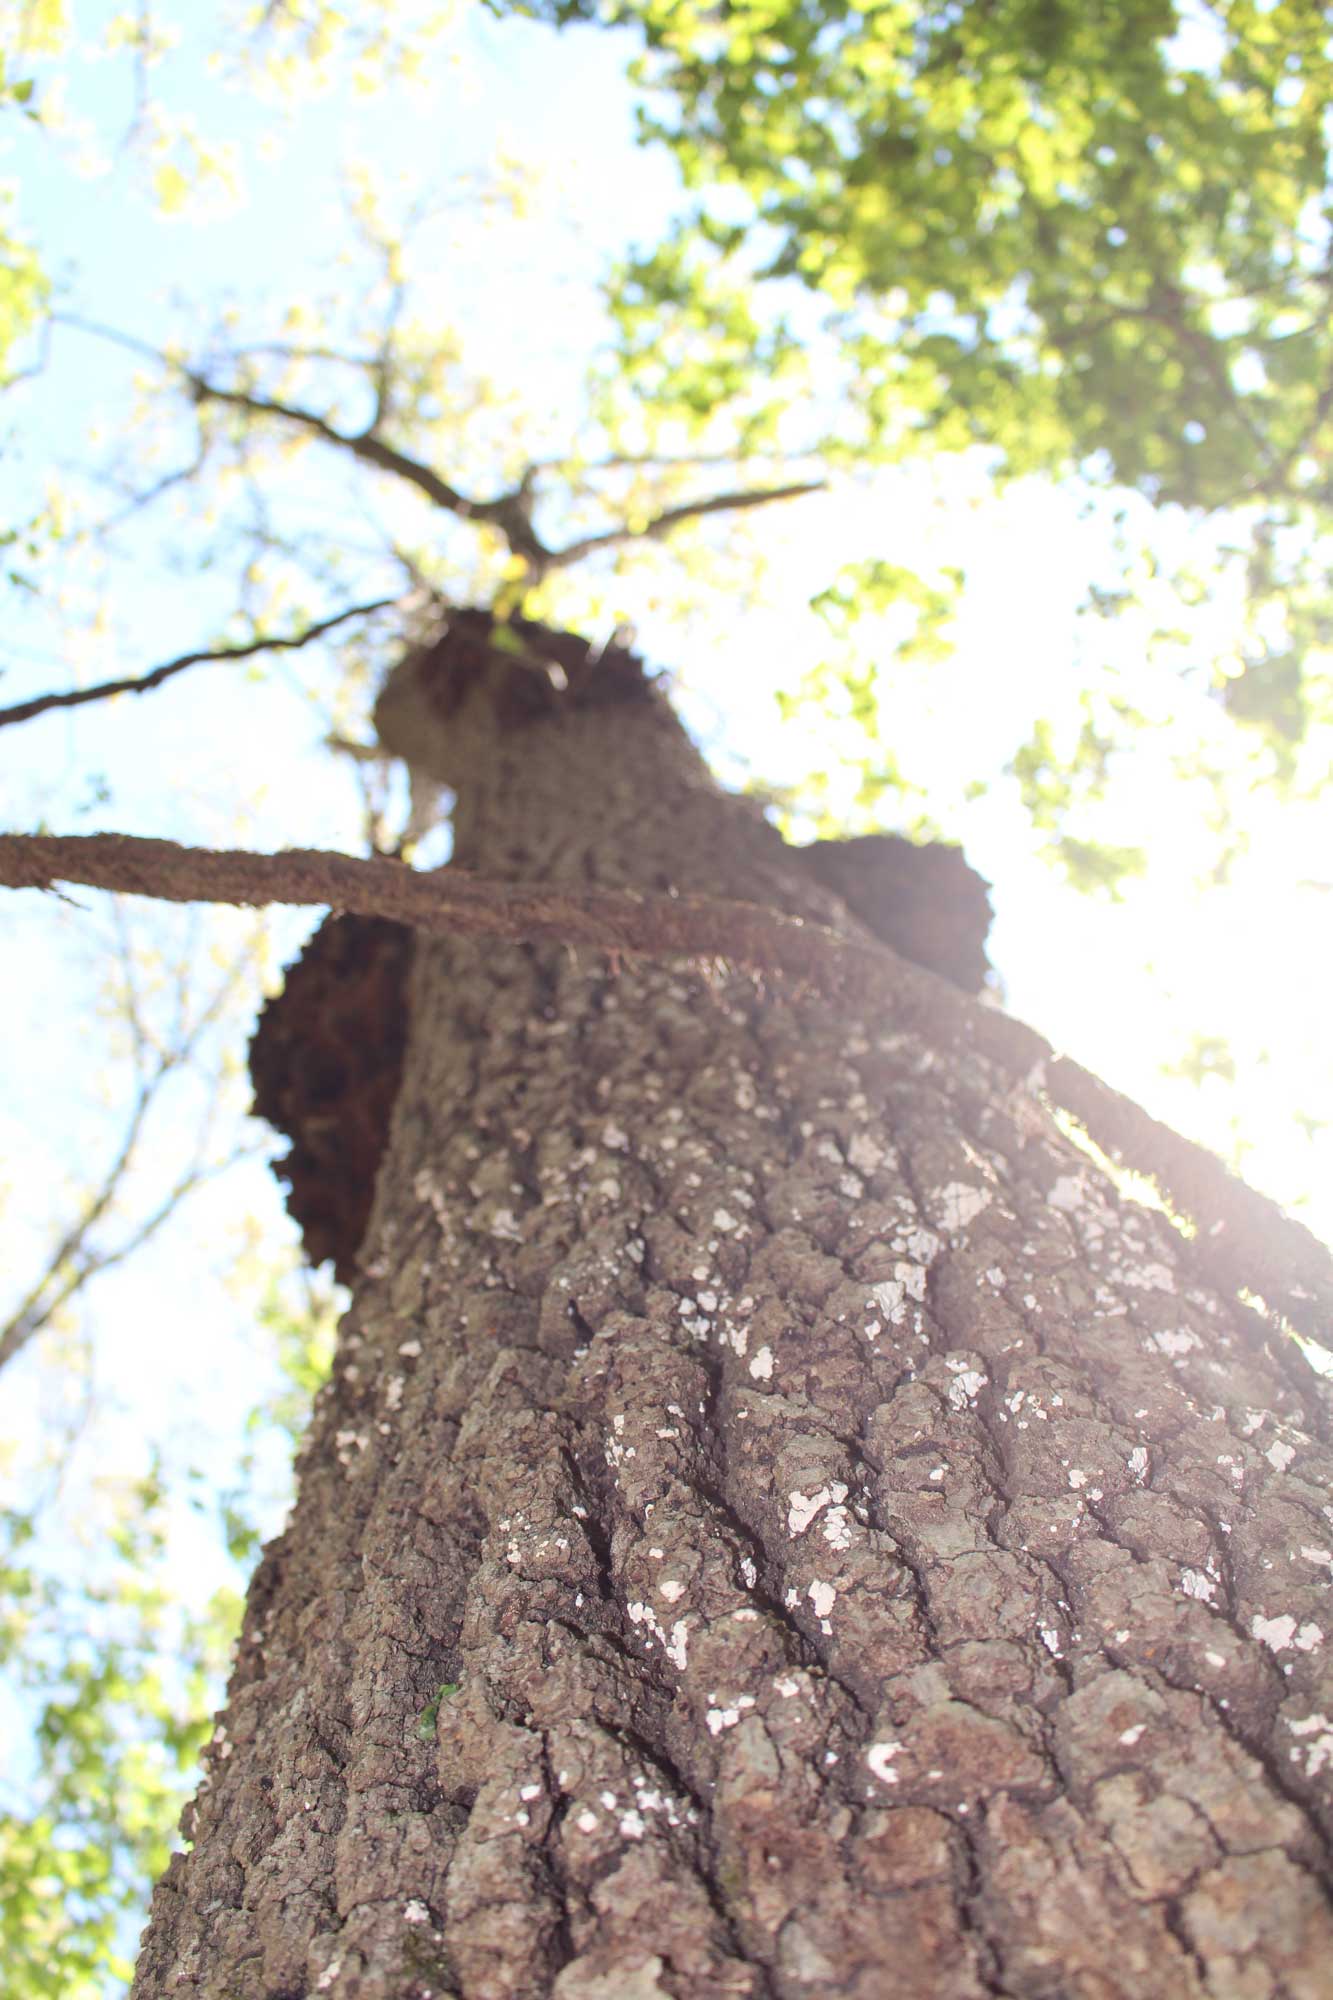 photo of a tree from the perspective of the base of the trunk viewing upward